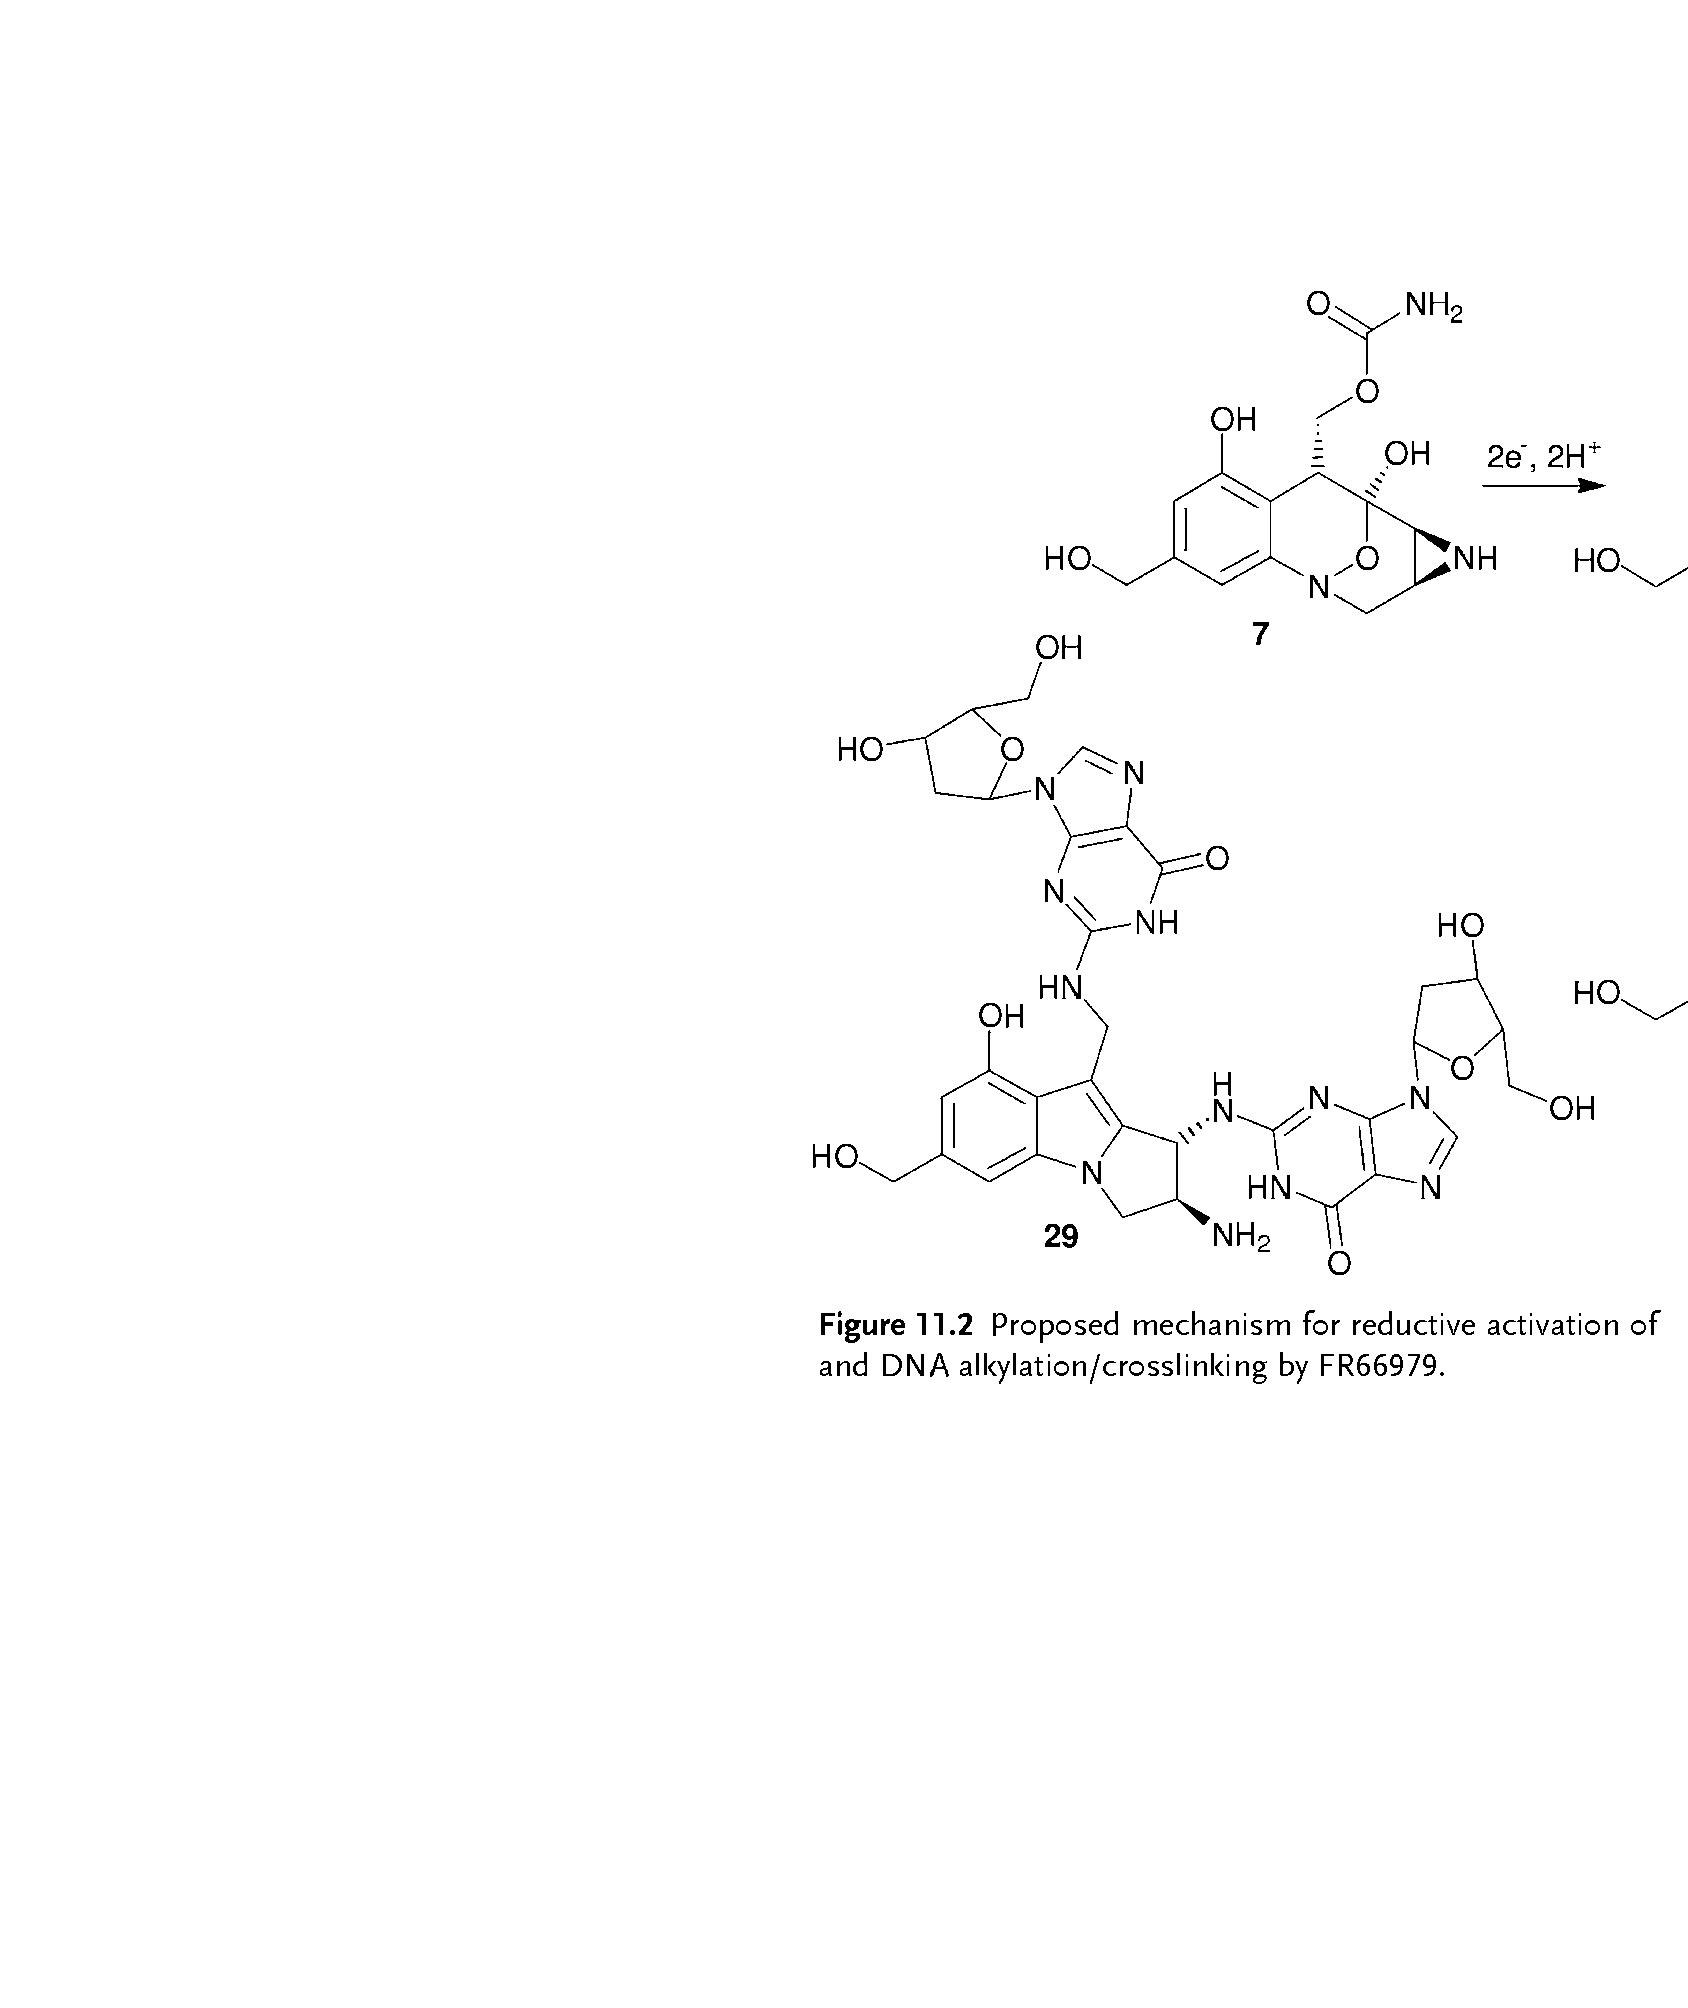 Figure 11.2 Proposed mechanism for reductive activation of and DNA alkylation/crosslinking by FR66979.